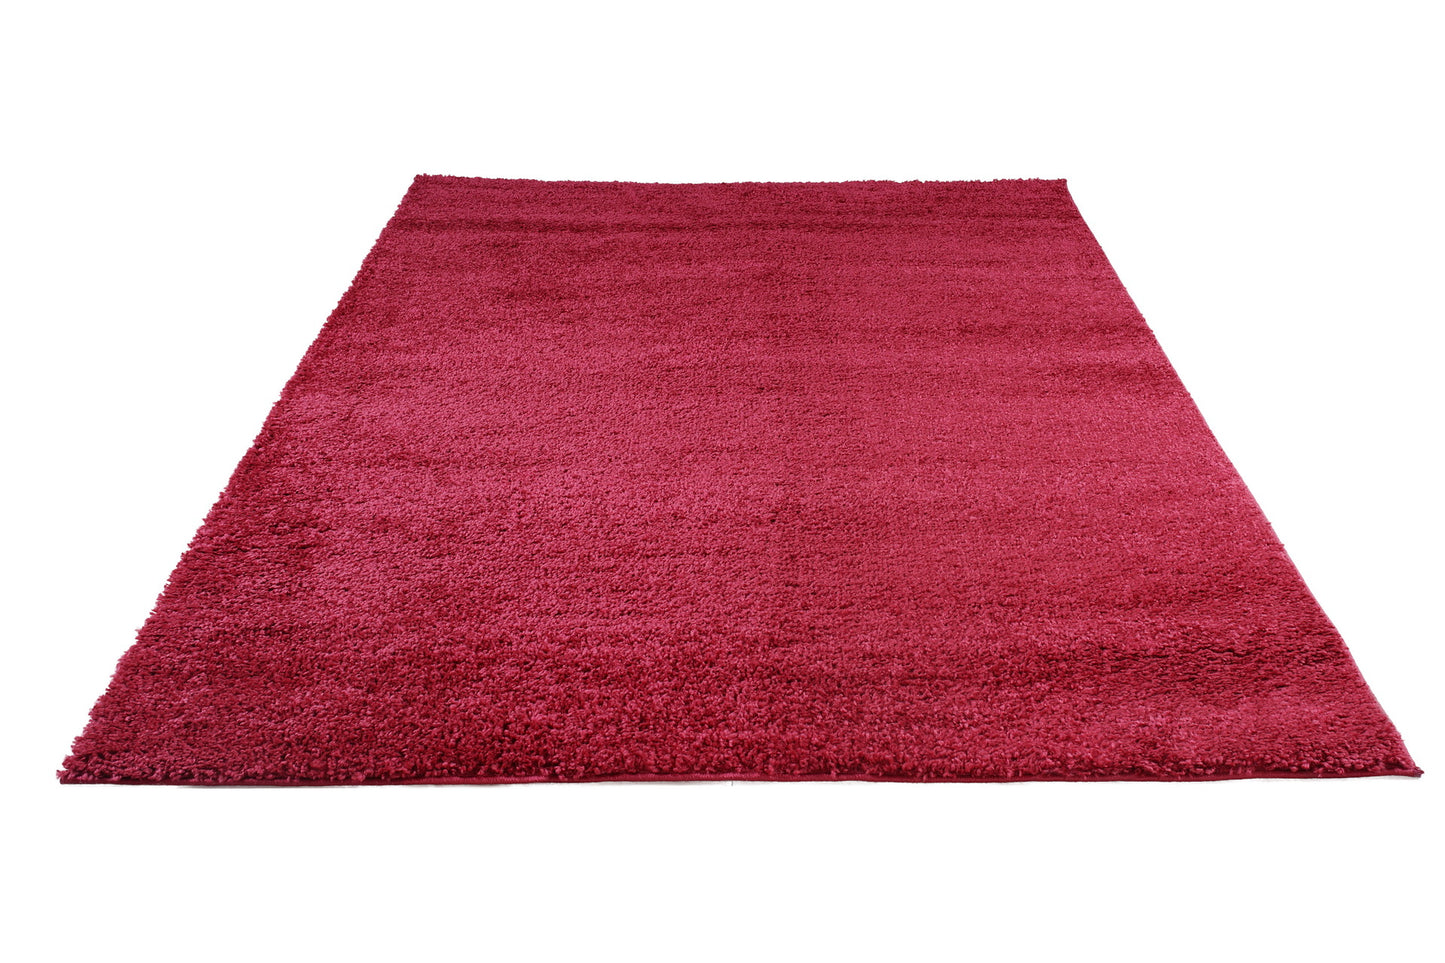 ladole rugs solid rose red shaggy meknes durable medium pile indoor area rug carpet 8x11 710 x 105 240cm x 320cm 2x8, 3x10, 2x10 ft Long Runner Rug, Hallway, Balcony, Entry Way, Kitchen, Stairs